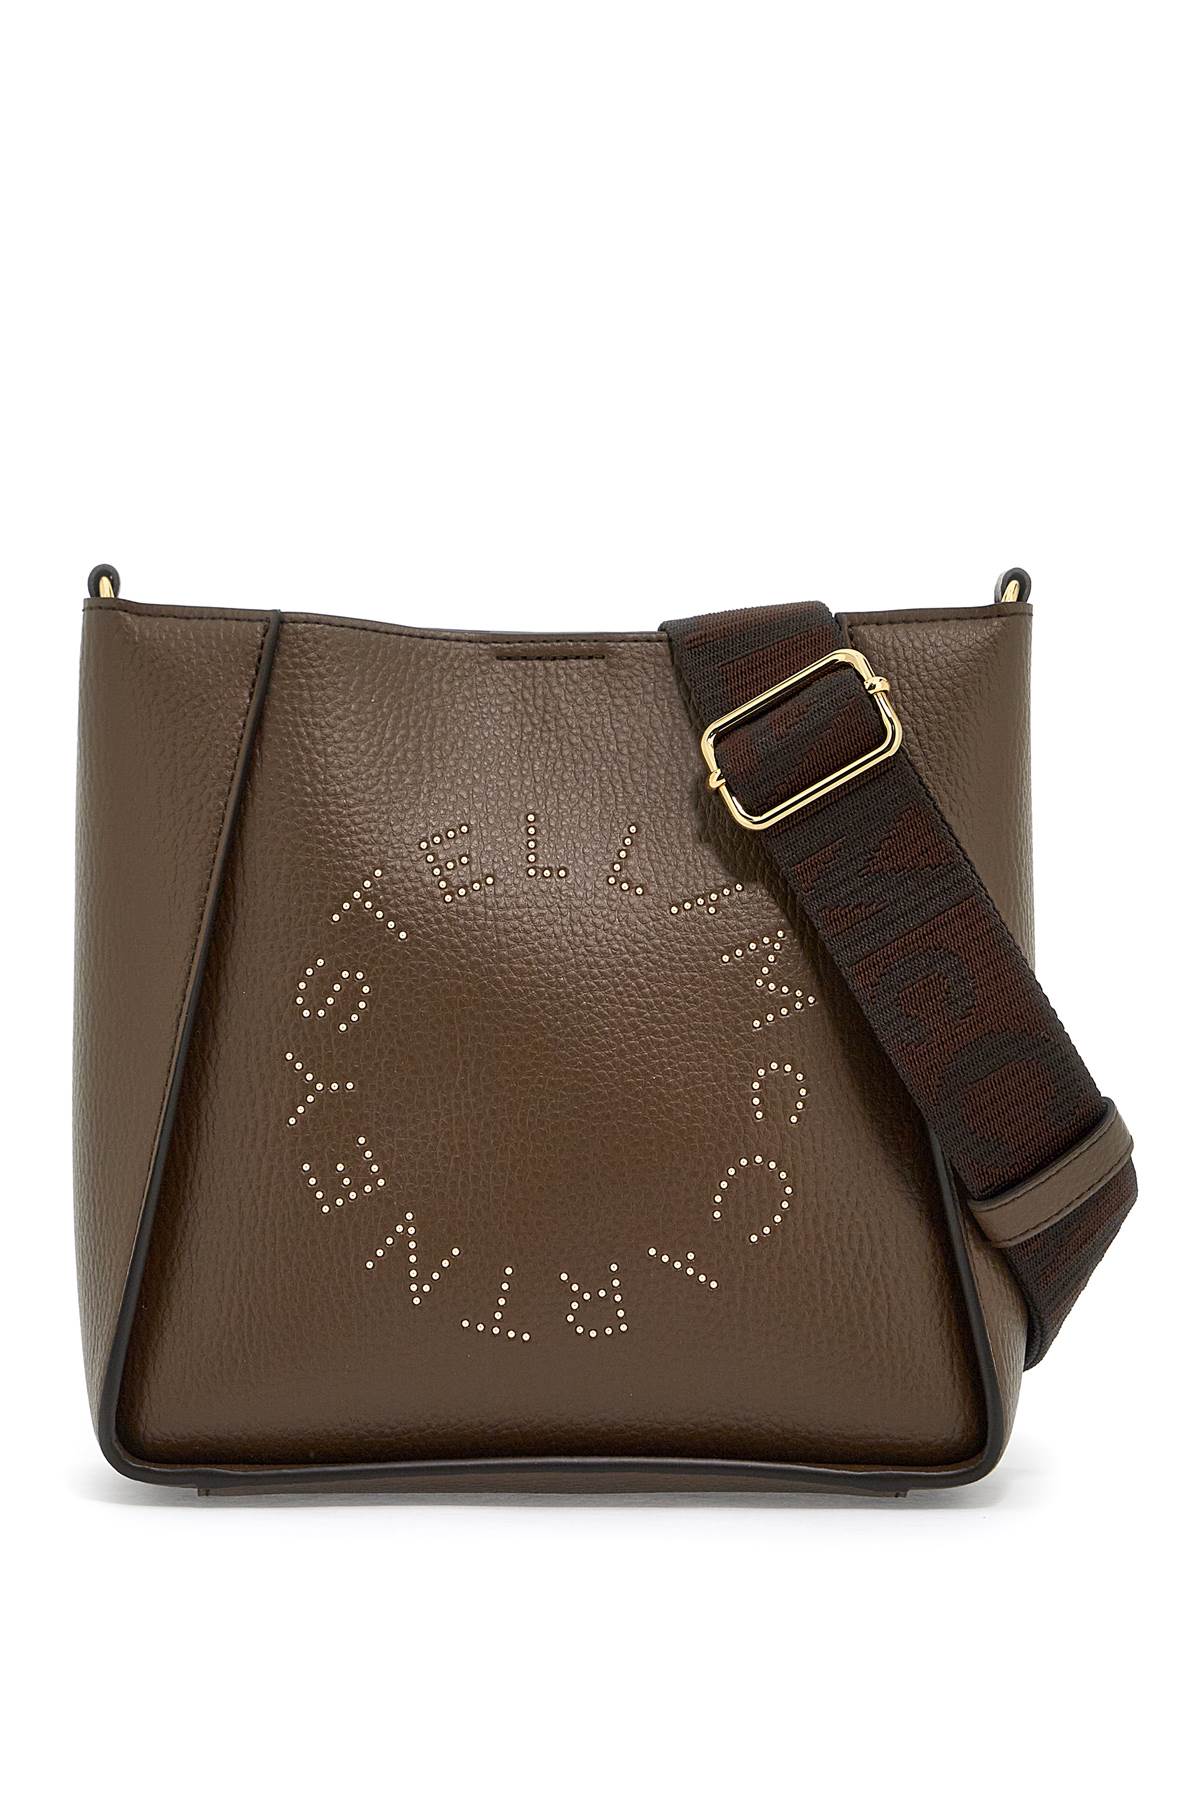 crossbody bag with perforated stella logo 700073 WP0234 BROWN